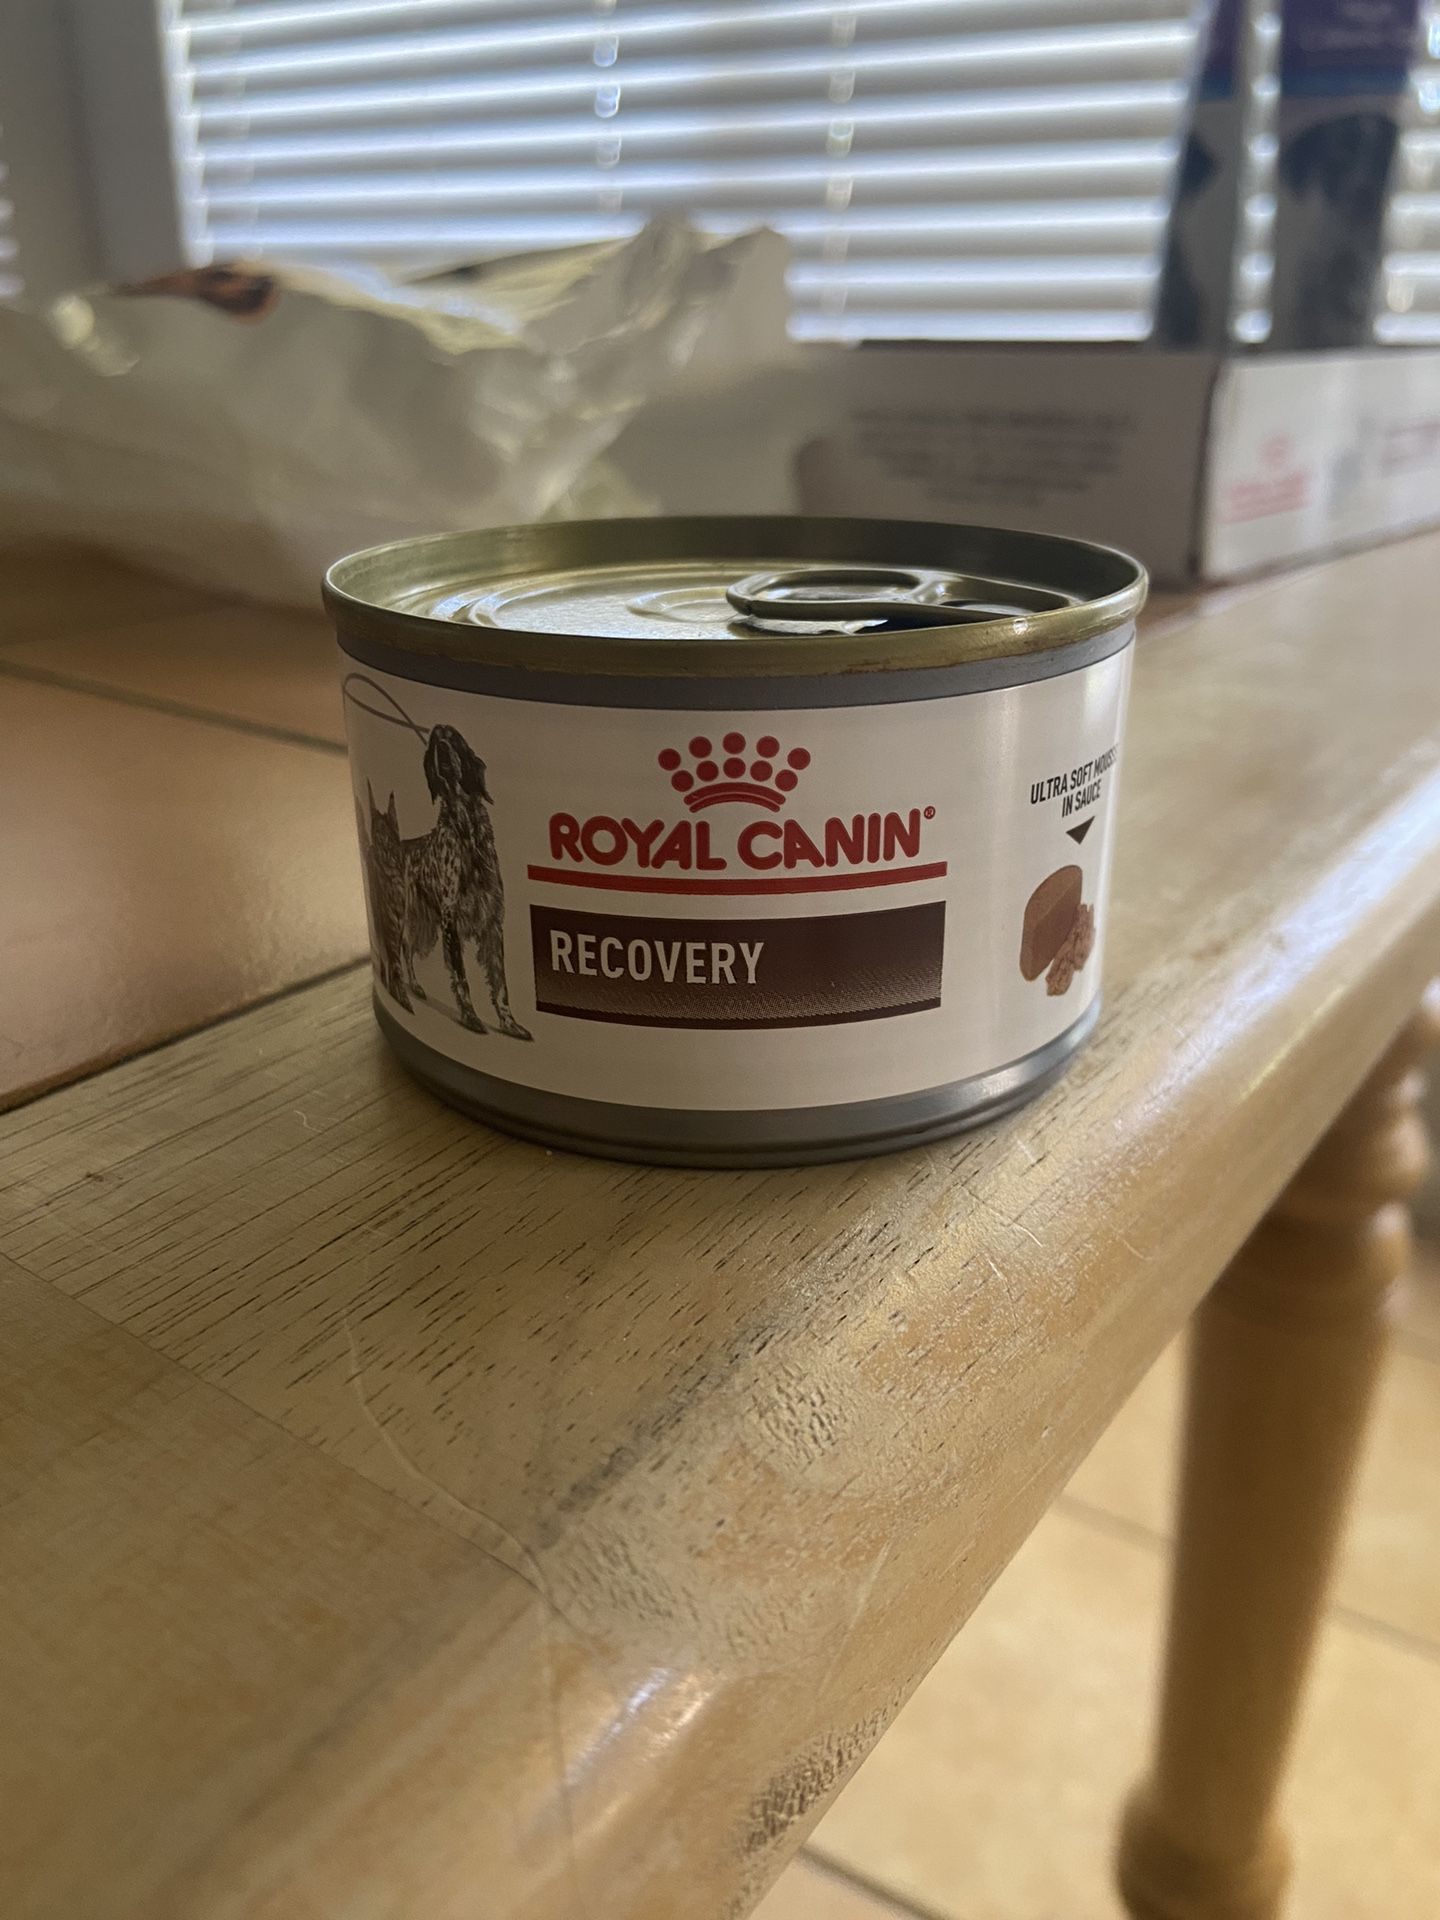 Royal Canin Recovery Dog Food